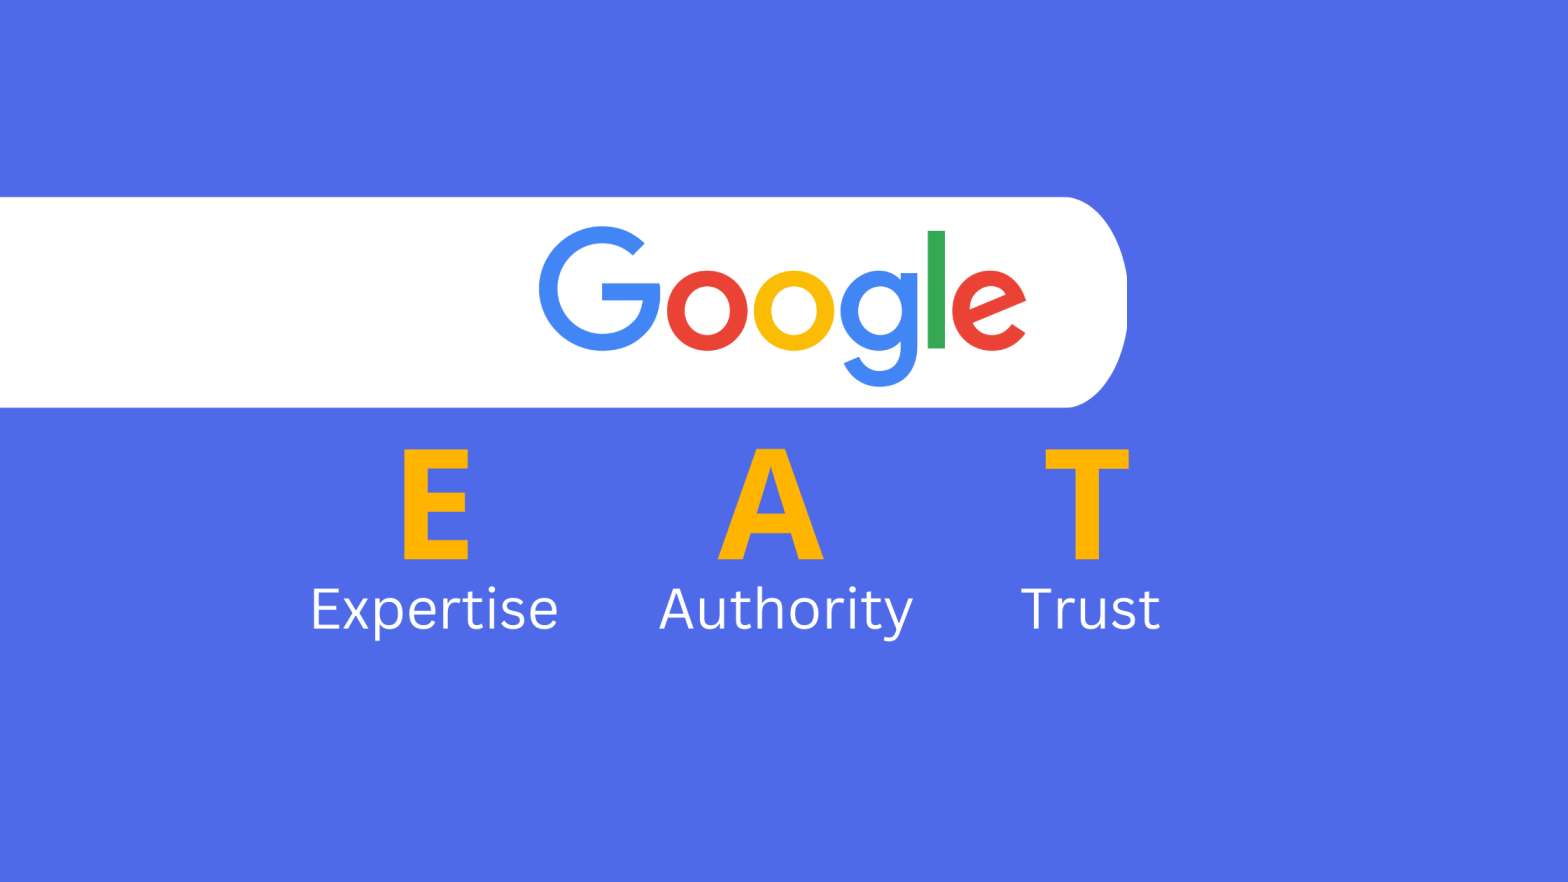 Google doubles up on E with updated search quality guidelines (E-E-A-T) in 2023